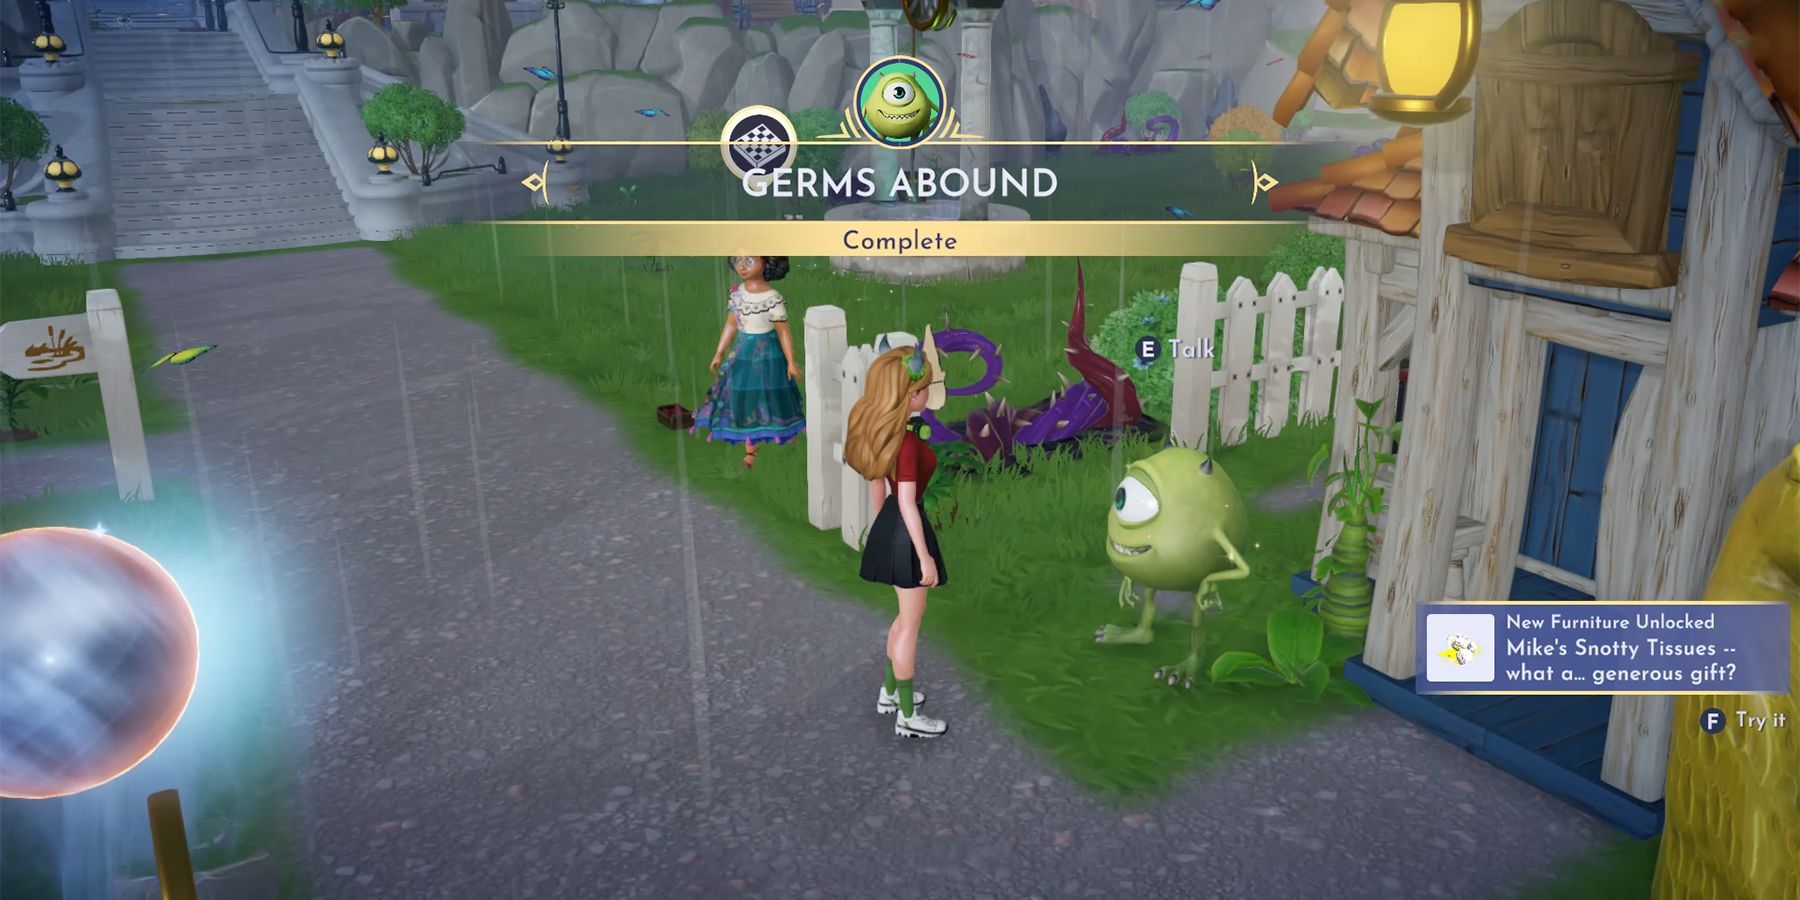 germs abound quest in disney dreamlight valley